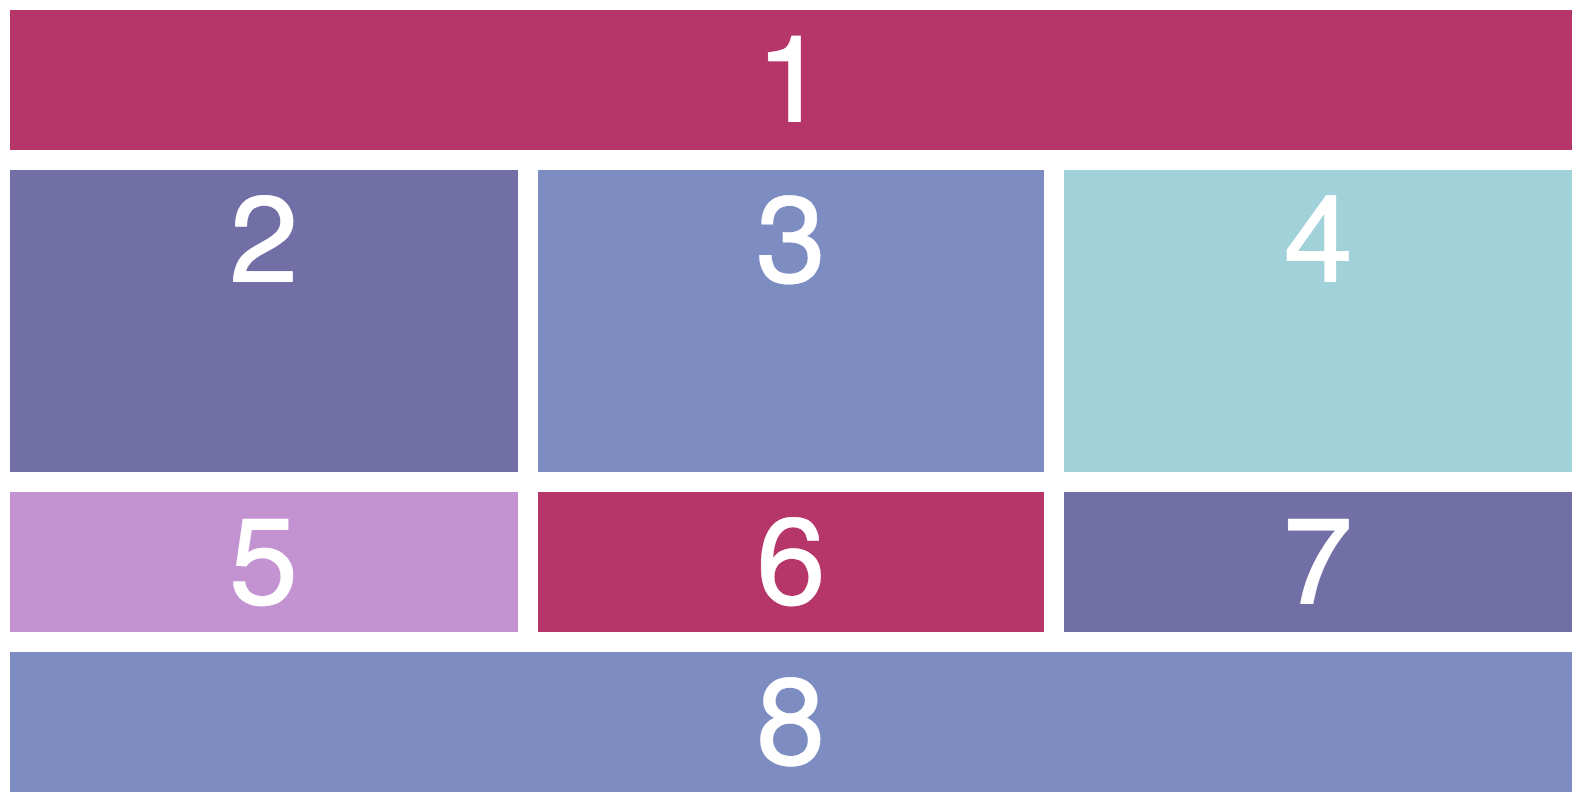 Box 1 takes up the entire first row of the grid. 2, 3 and 4 share the second row equally. 5, 6 and 7 similarly share the third row, but are shorter than 2, 3 and 4. Like 1, box 8 takes up the entire fourth row.